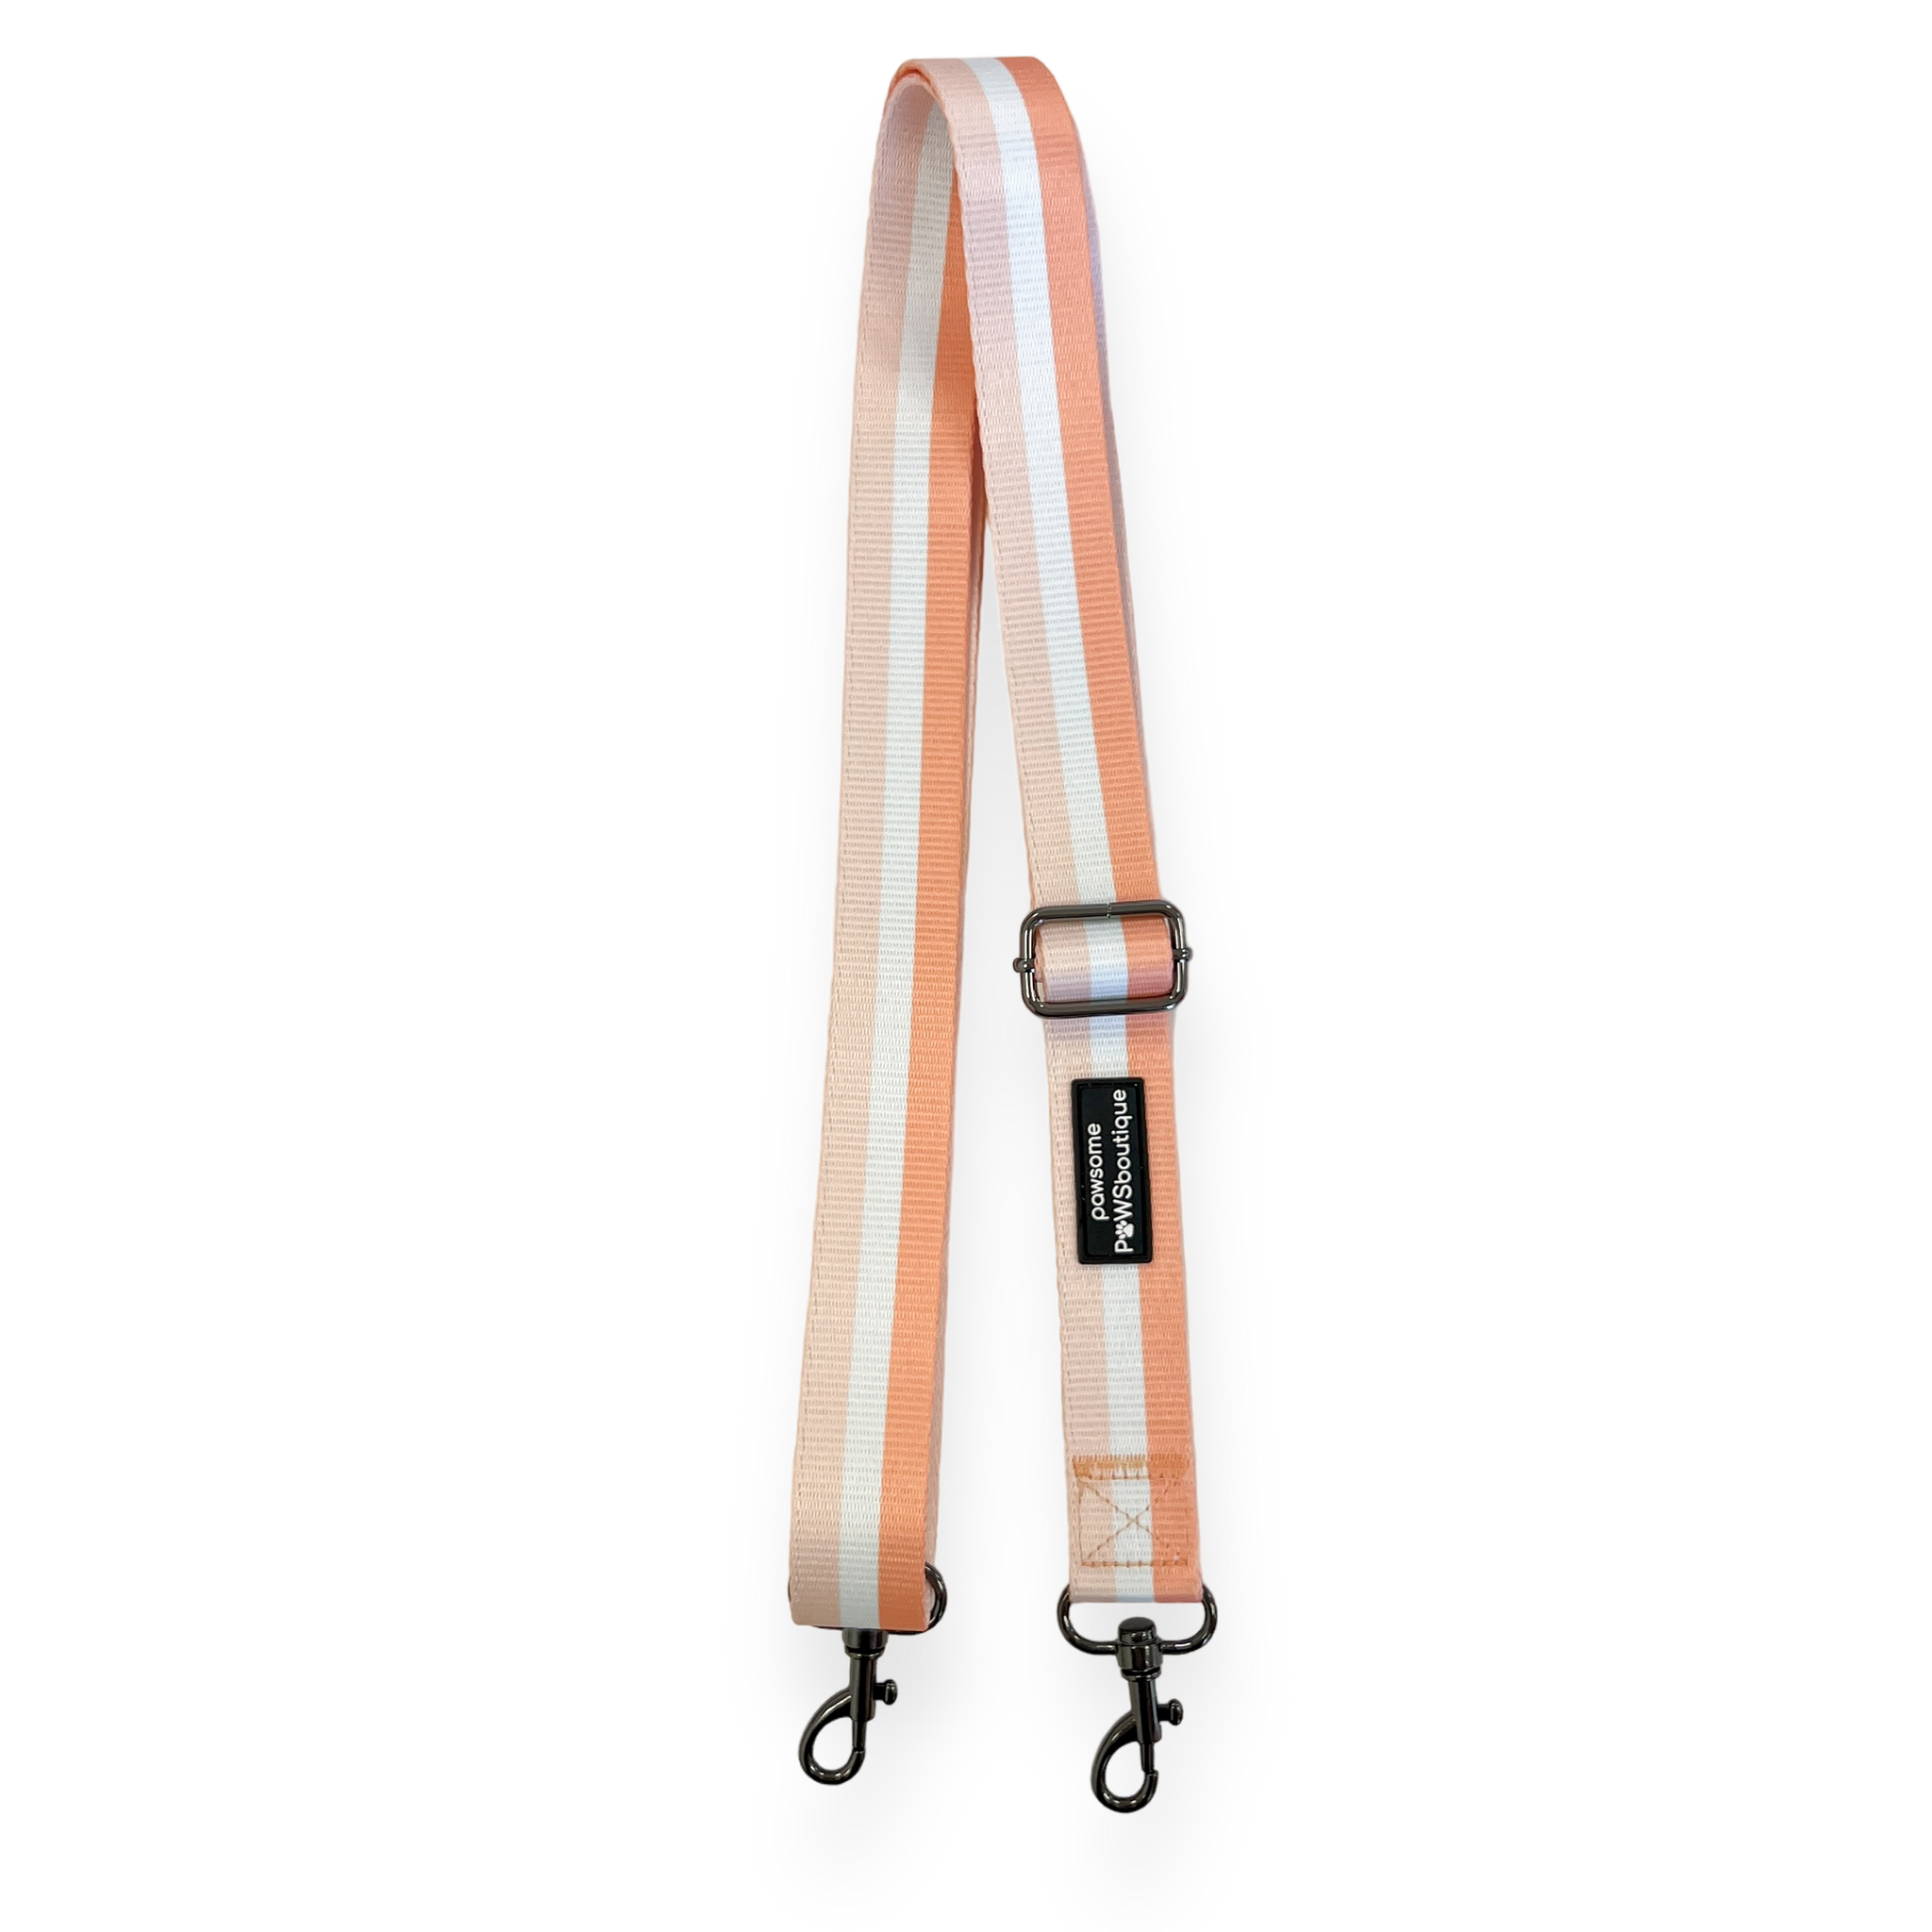 Bag Strap (BAG NOT INCLUDED) - Peach